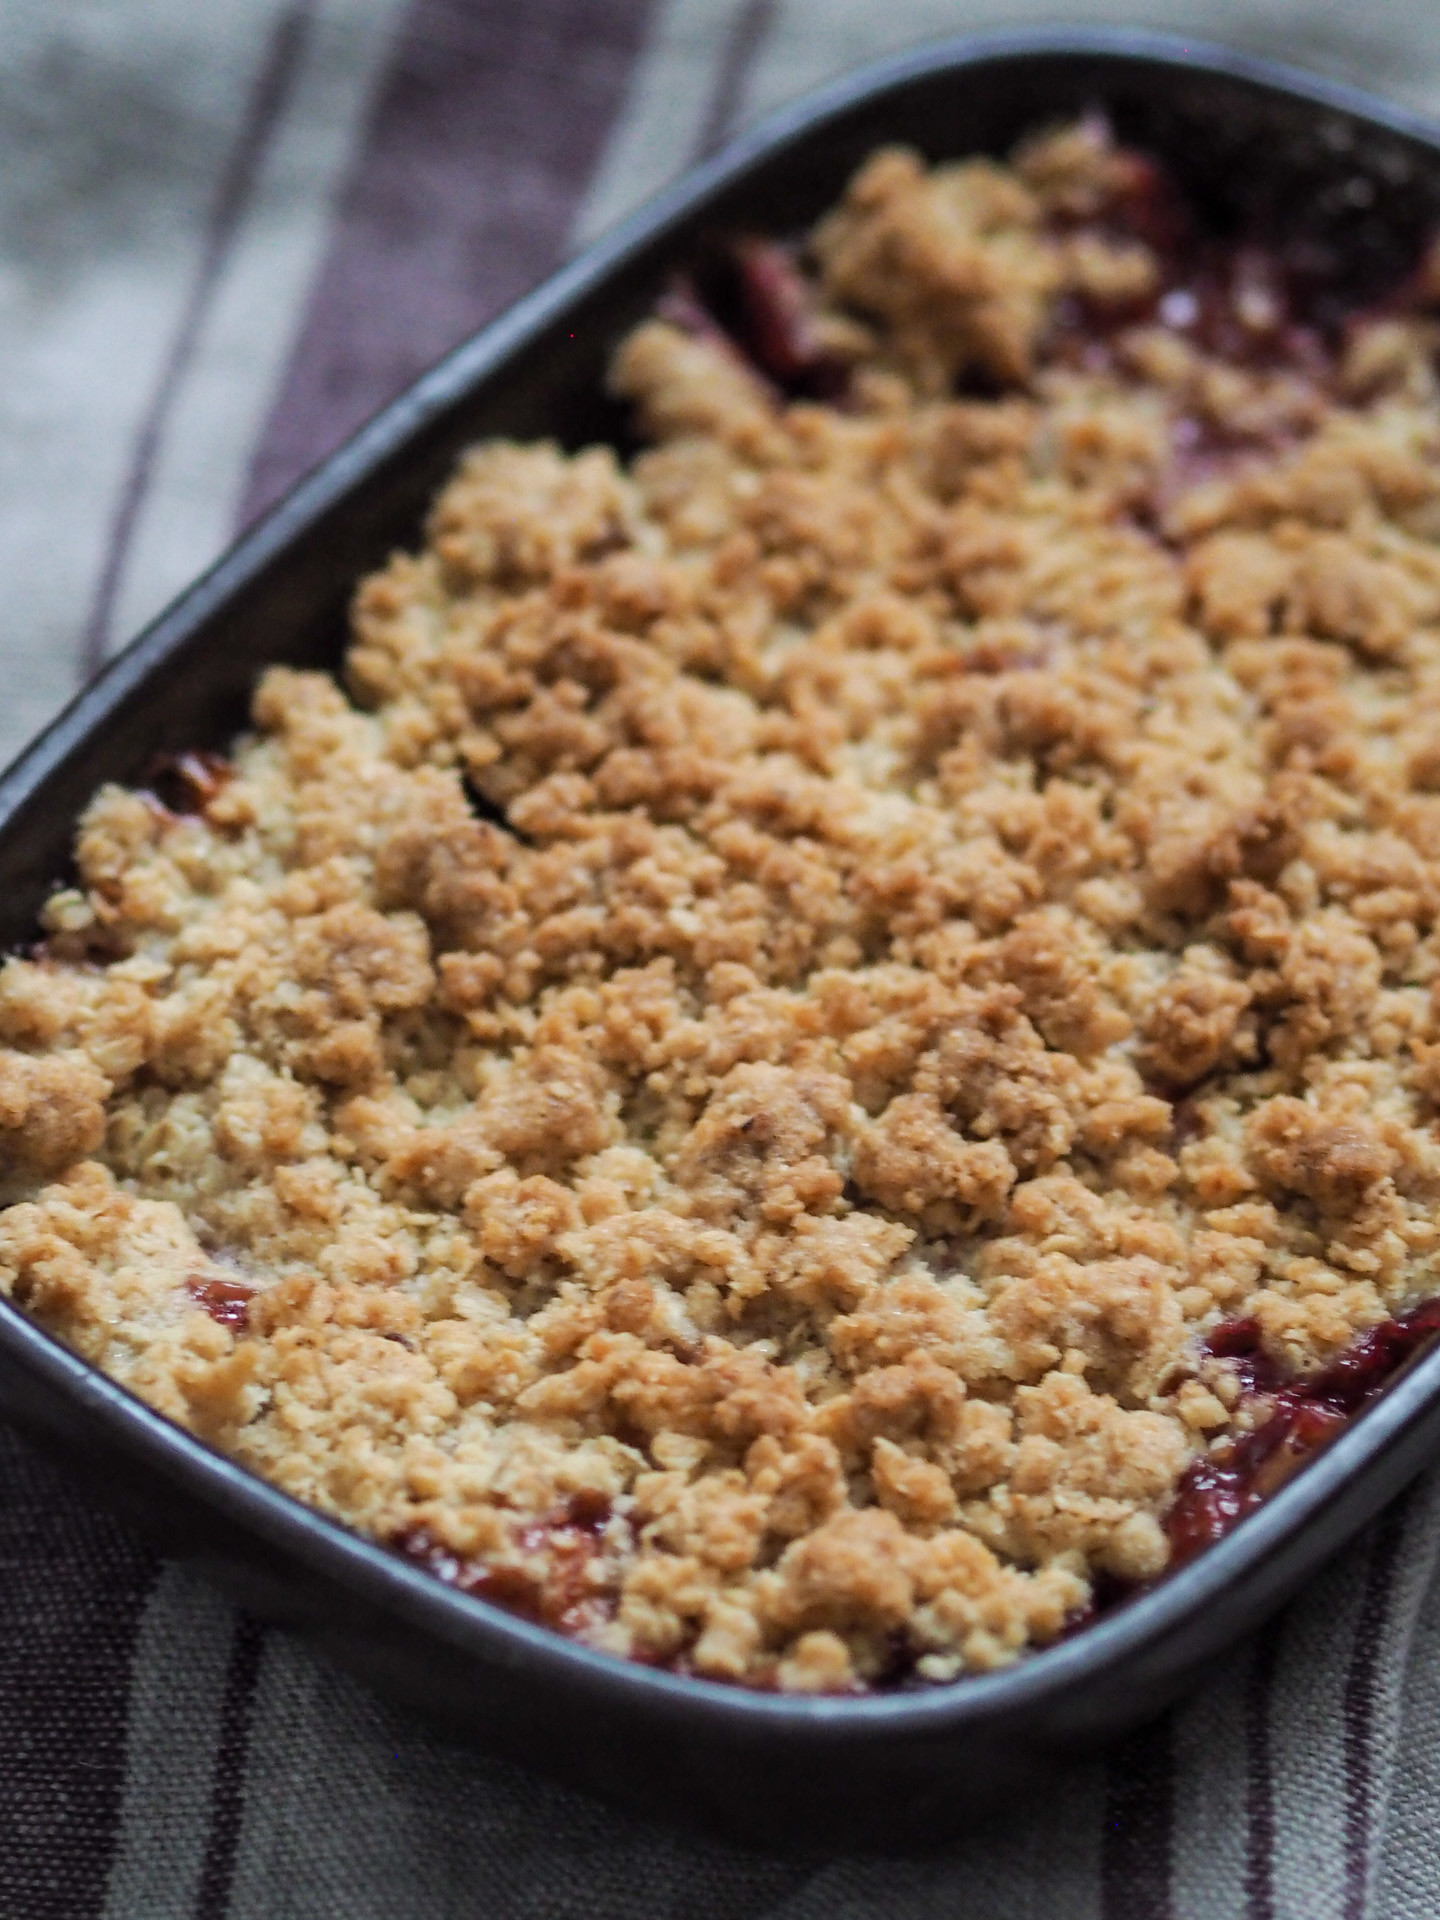 crisp oatmeal crumble topping for your desserts